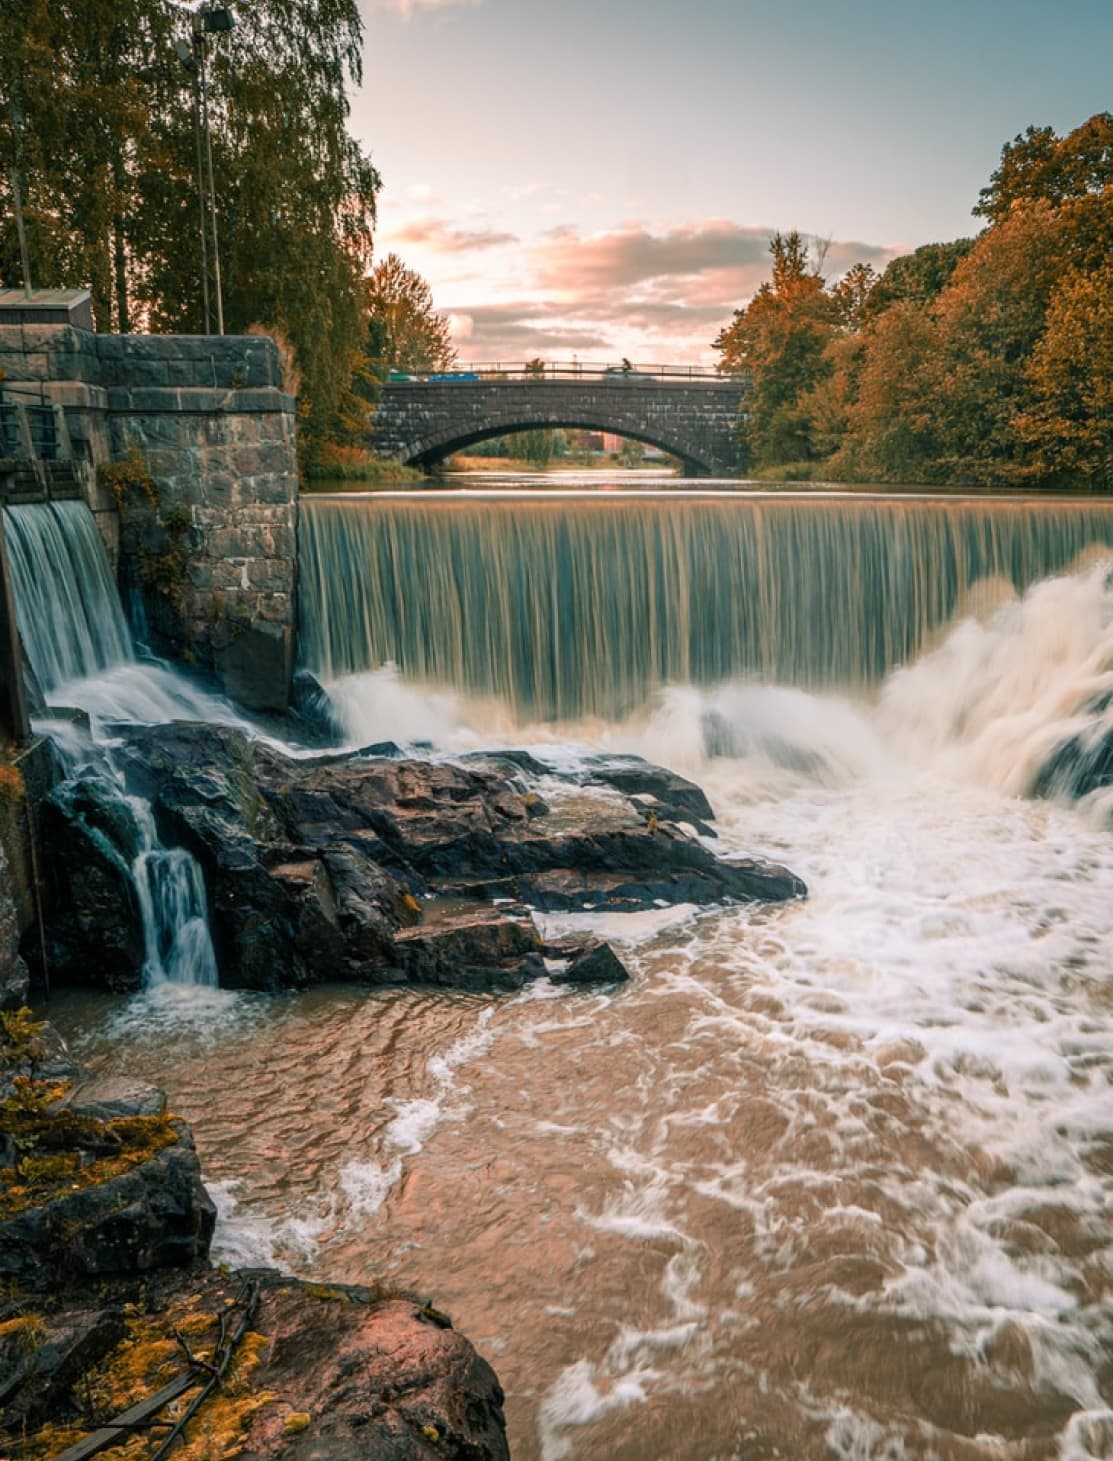 Waterfall with a bridge in the background in Helsinki